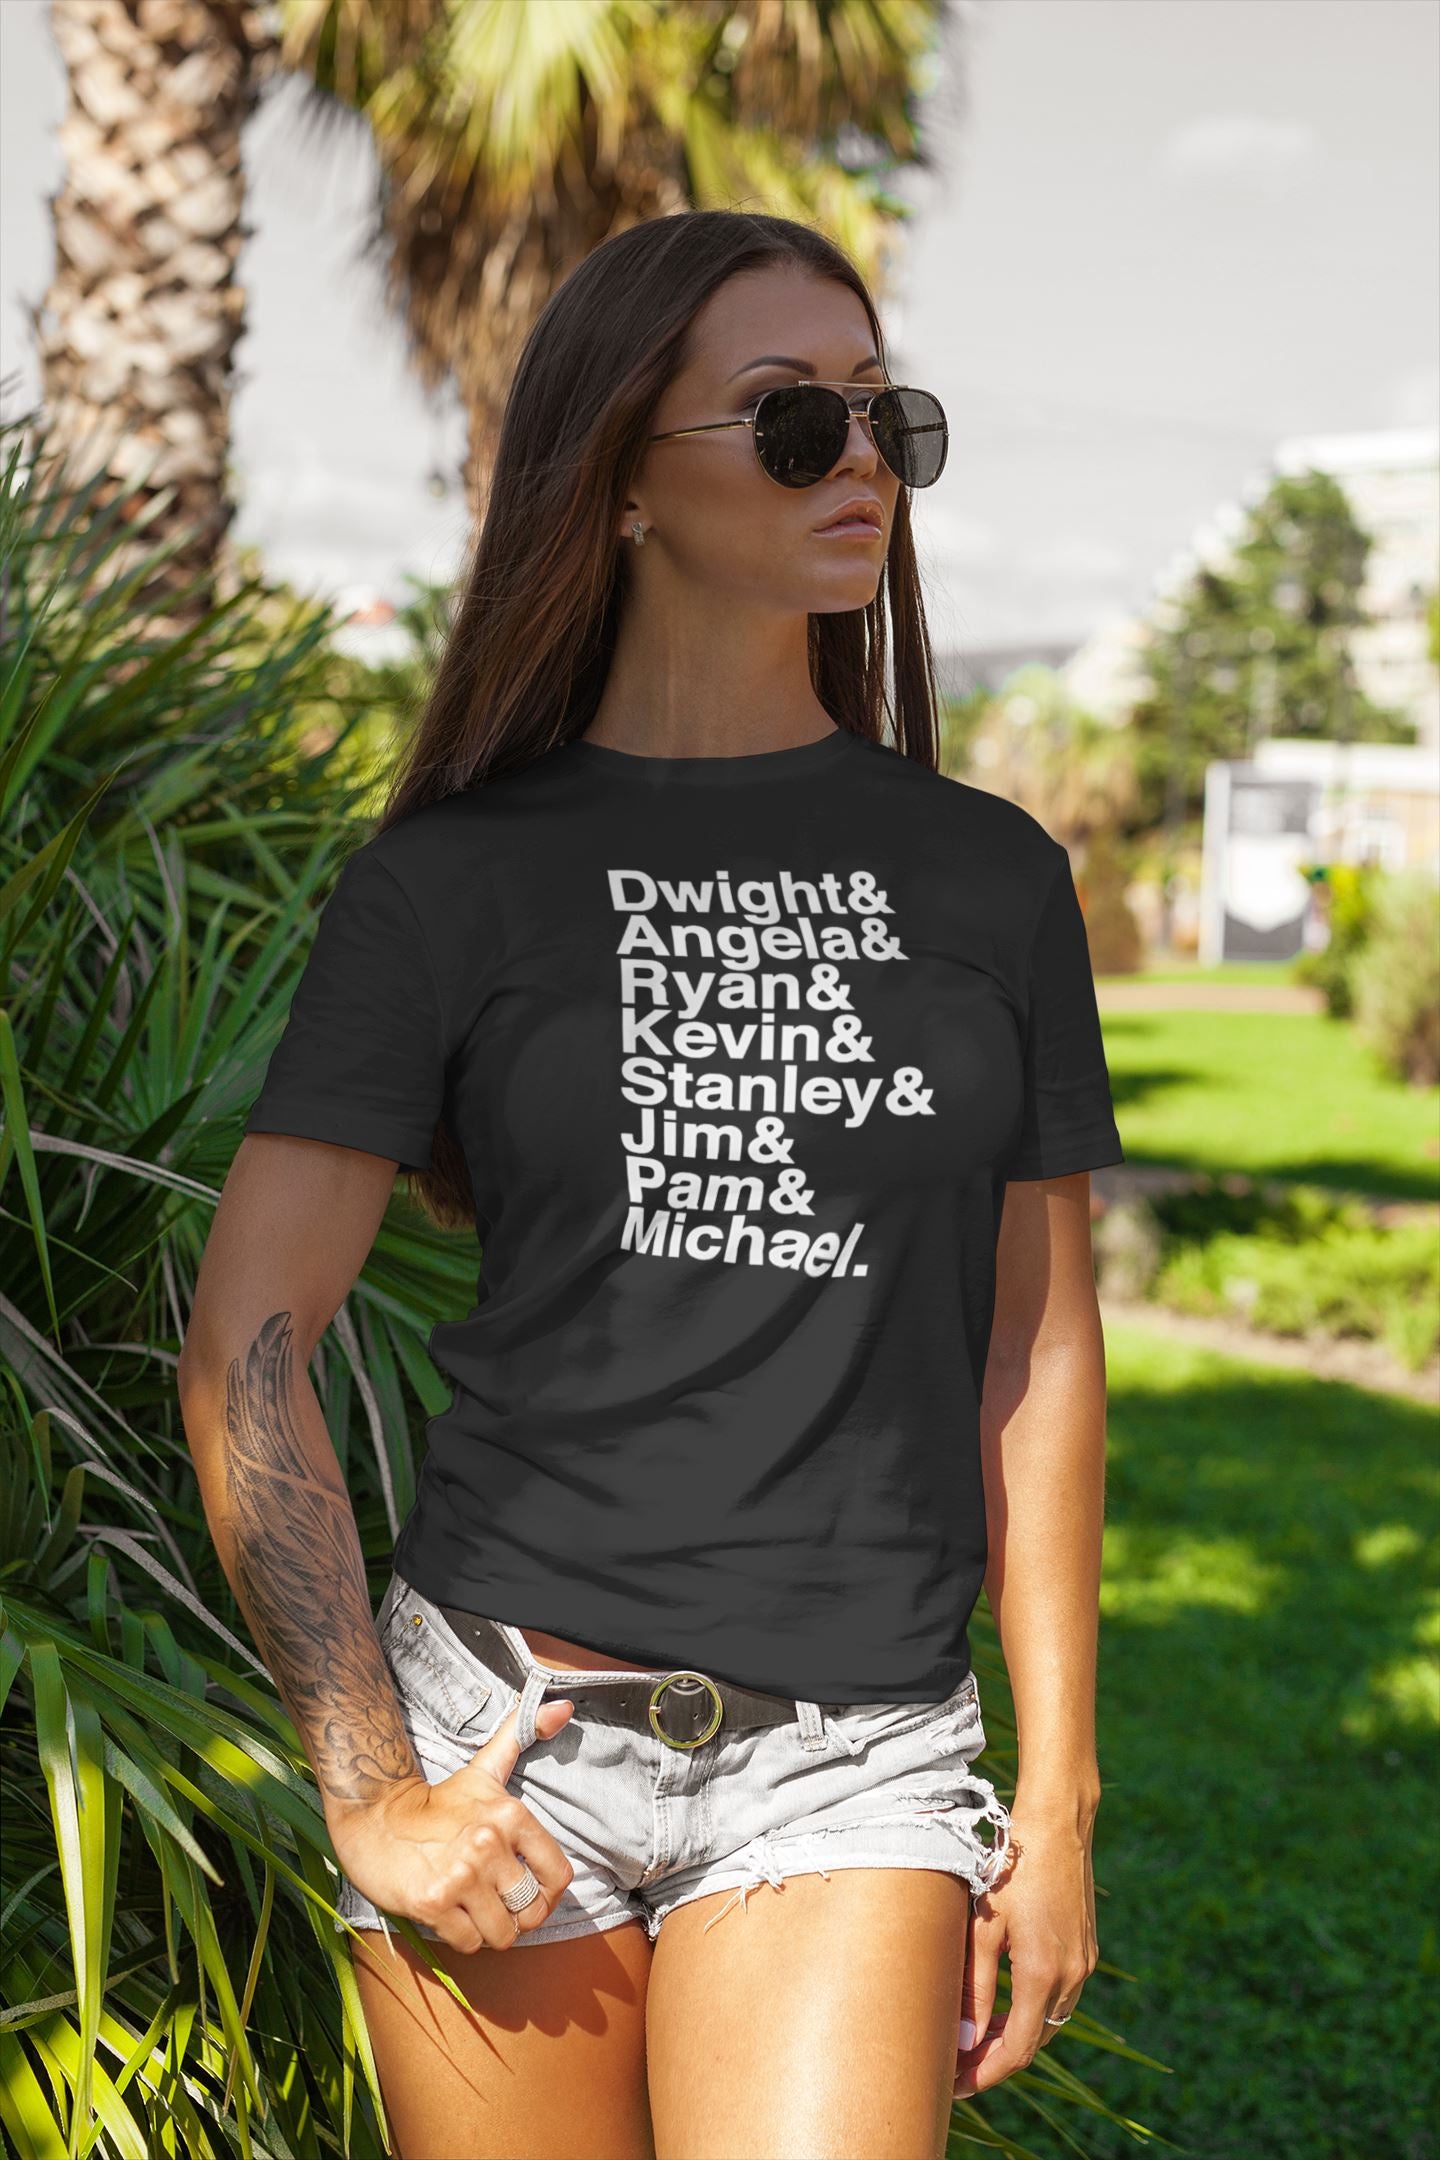 The Full Office Cast Names Official Black T Shirt for Men and Women freeshipping - Catch My Drift India